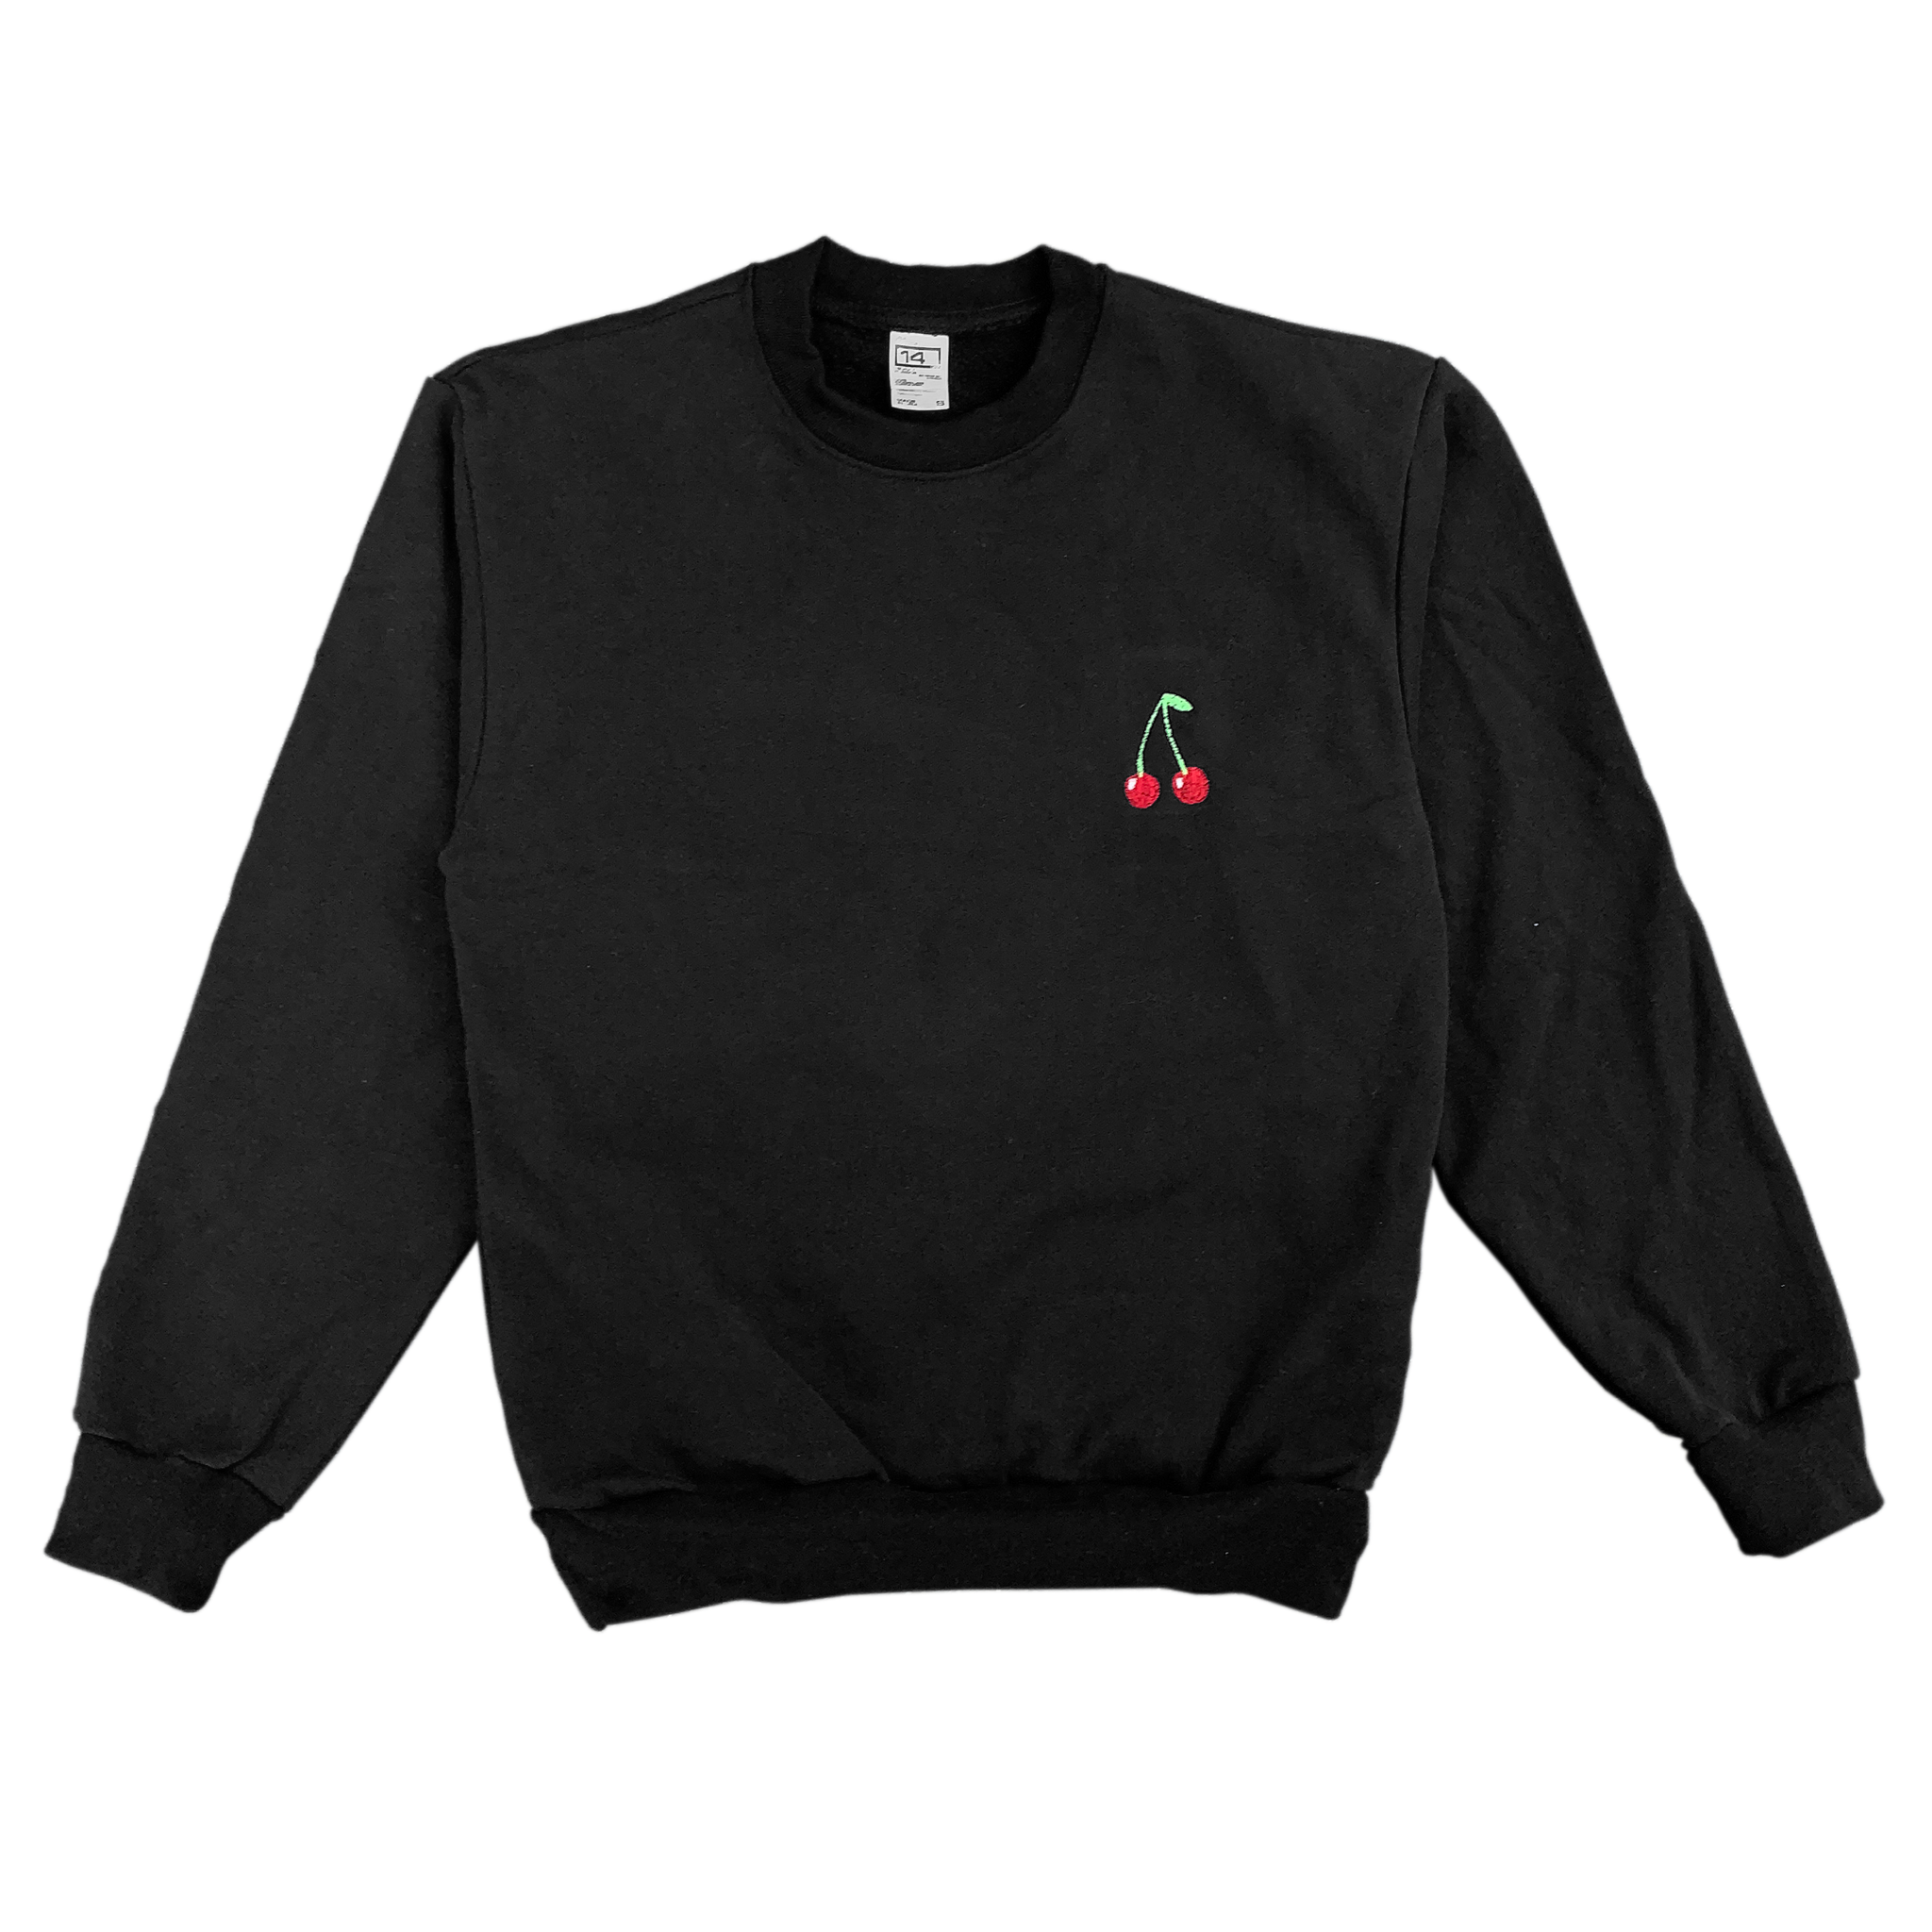 Embroidered Crew Neck - 2XL